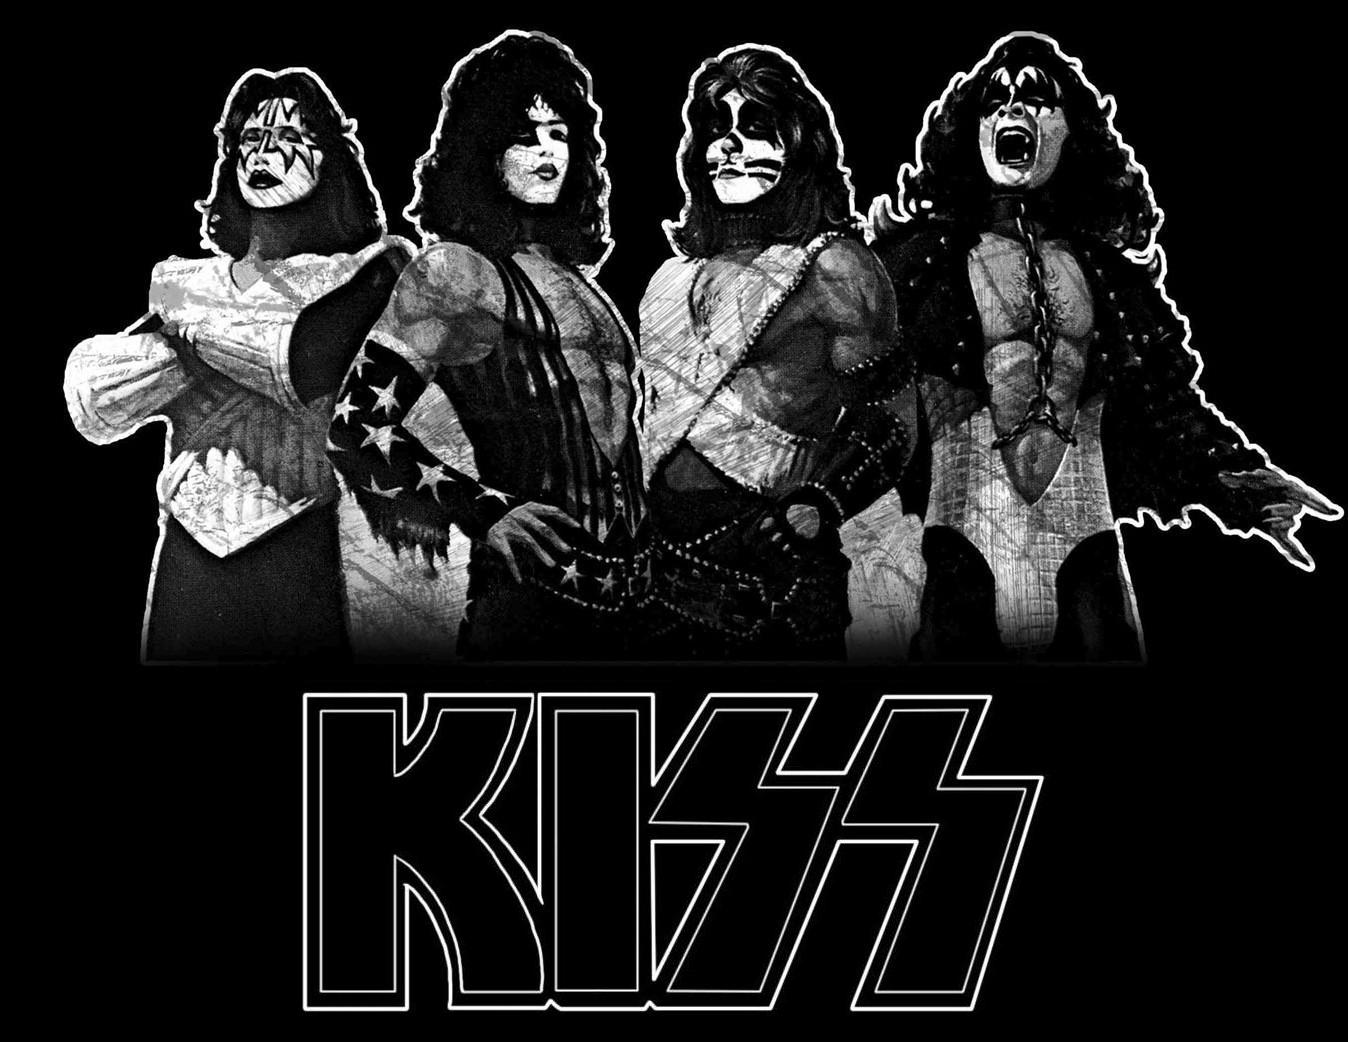 cartoon kiss wallpaper,font,album cover,photography,graphic design,black and white